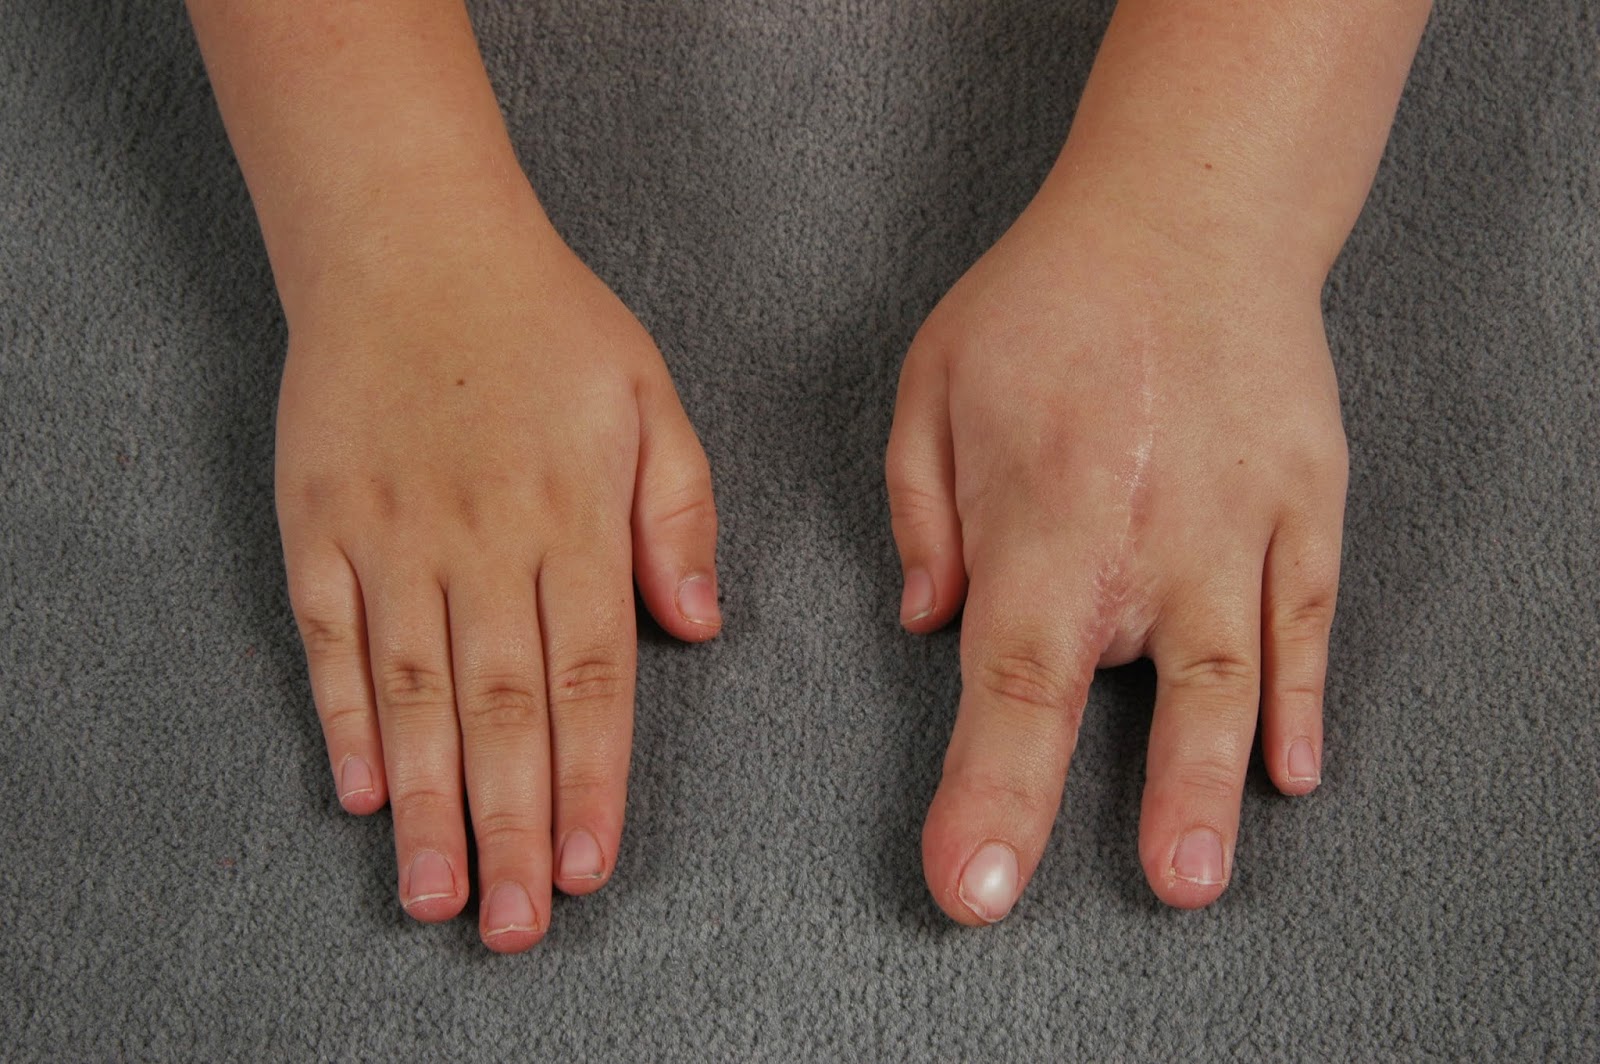 Macrodactyly Big Fingers Congenital Hand And Arm Differences Washington University In St Louis